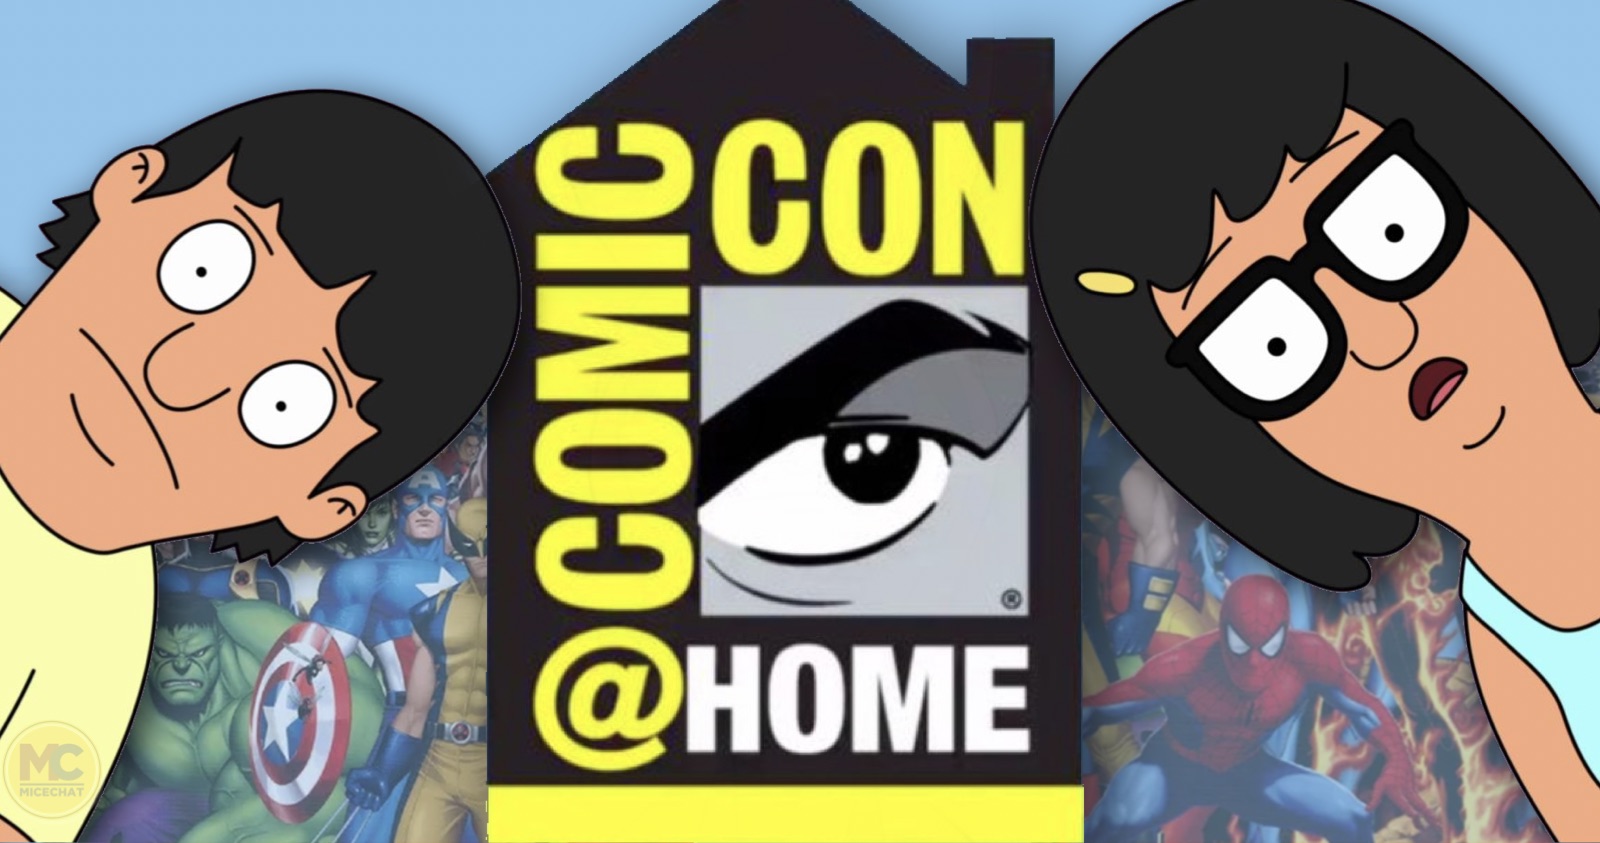 The cast of The New Mutants participates in “Comic-Con @ Home” panel since  Comic-Con was cancelled